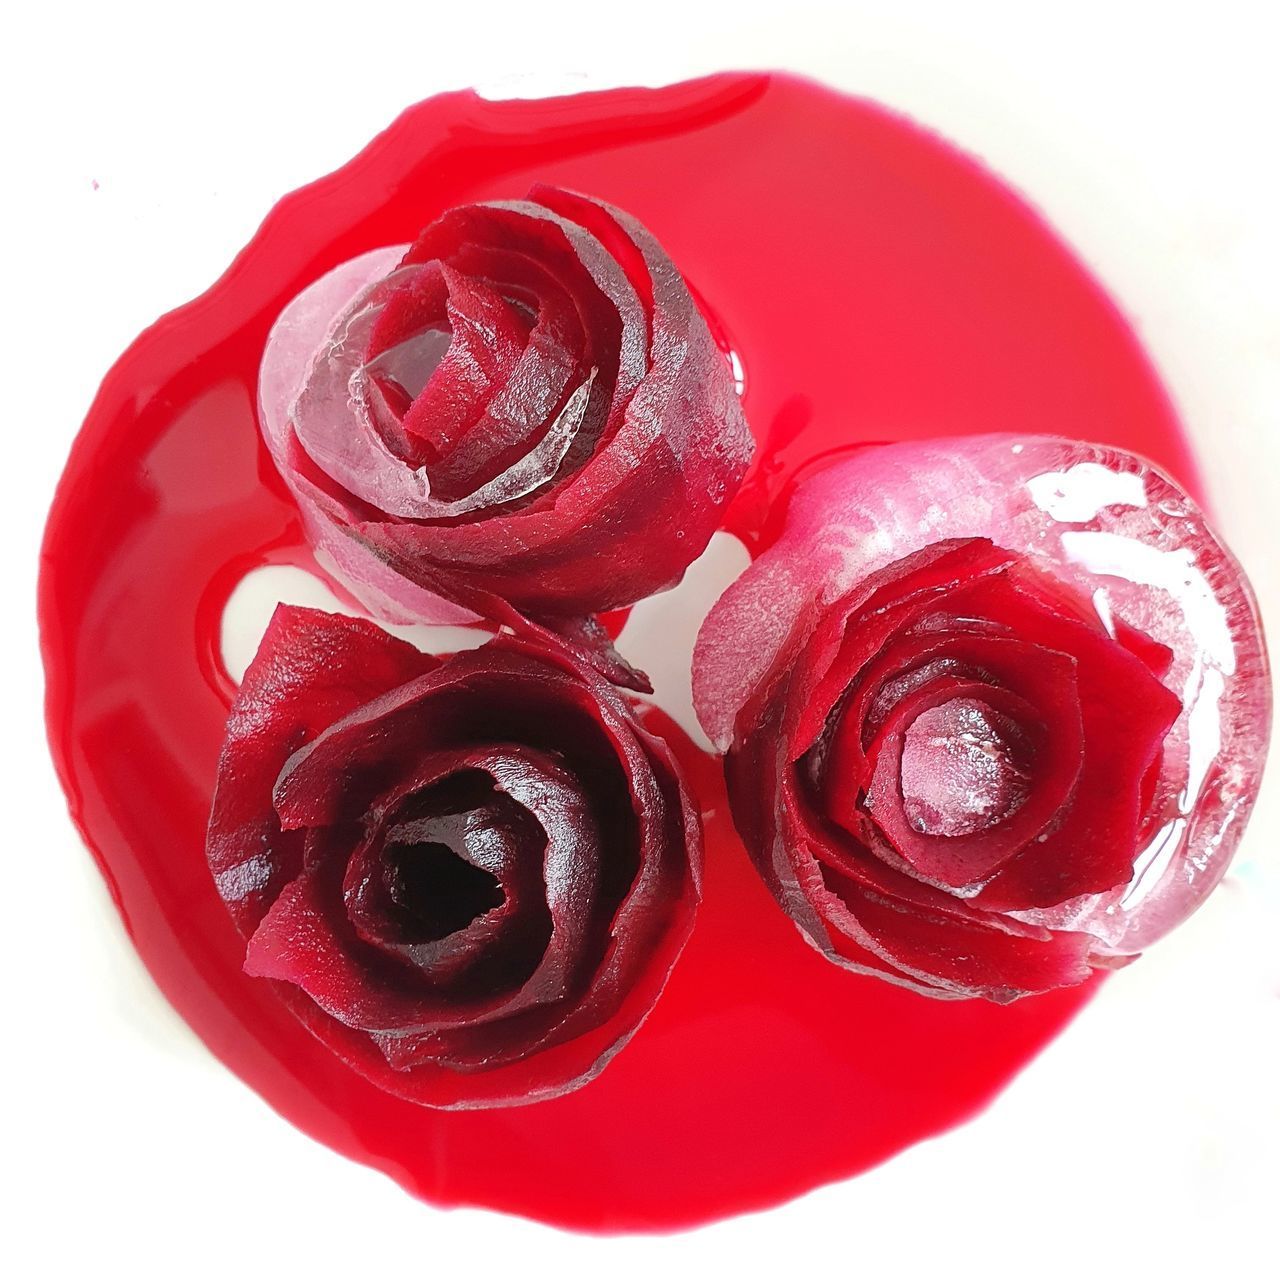 CLOSE-UP OF RED ROSE ON WHITE SURFACE